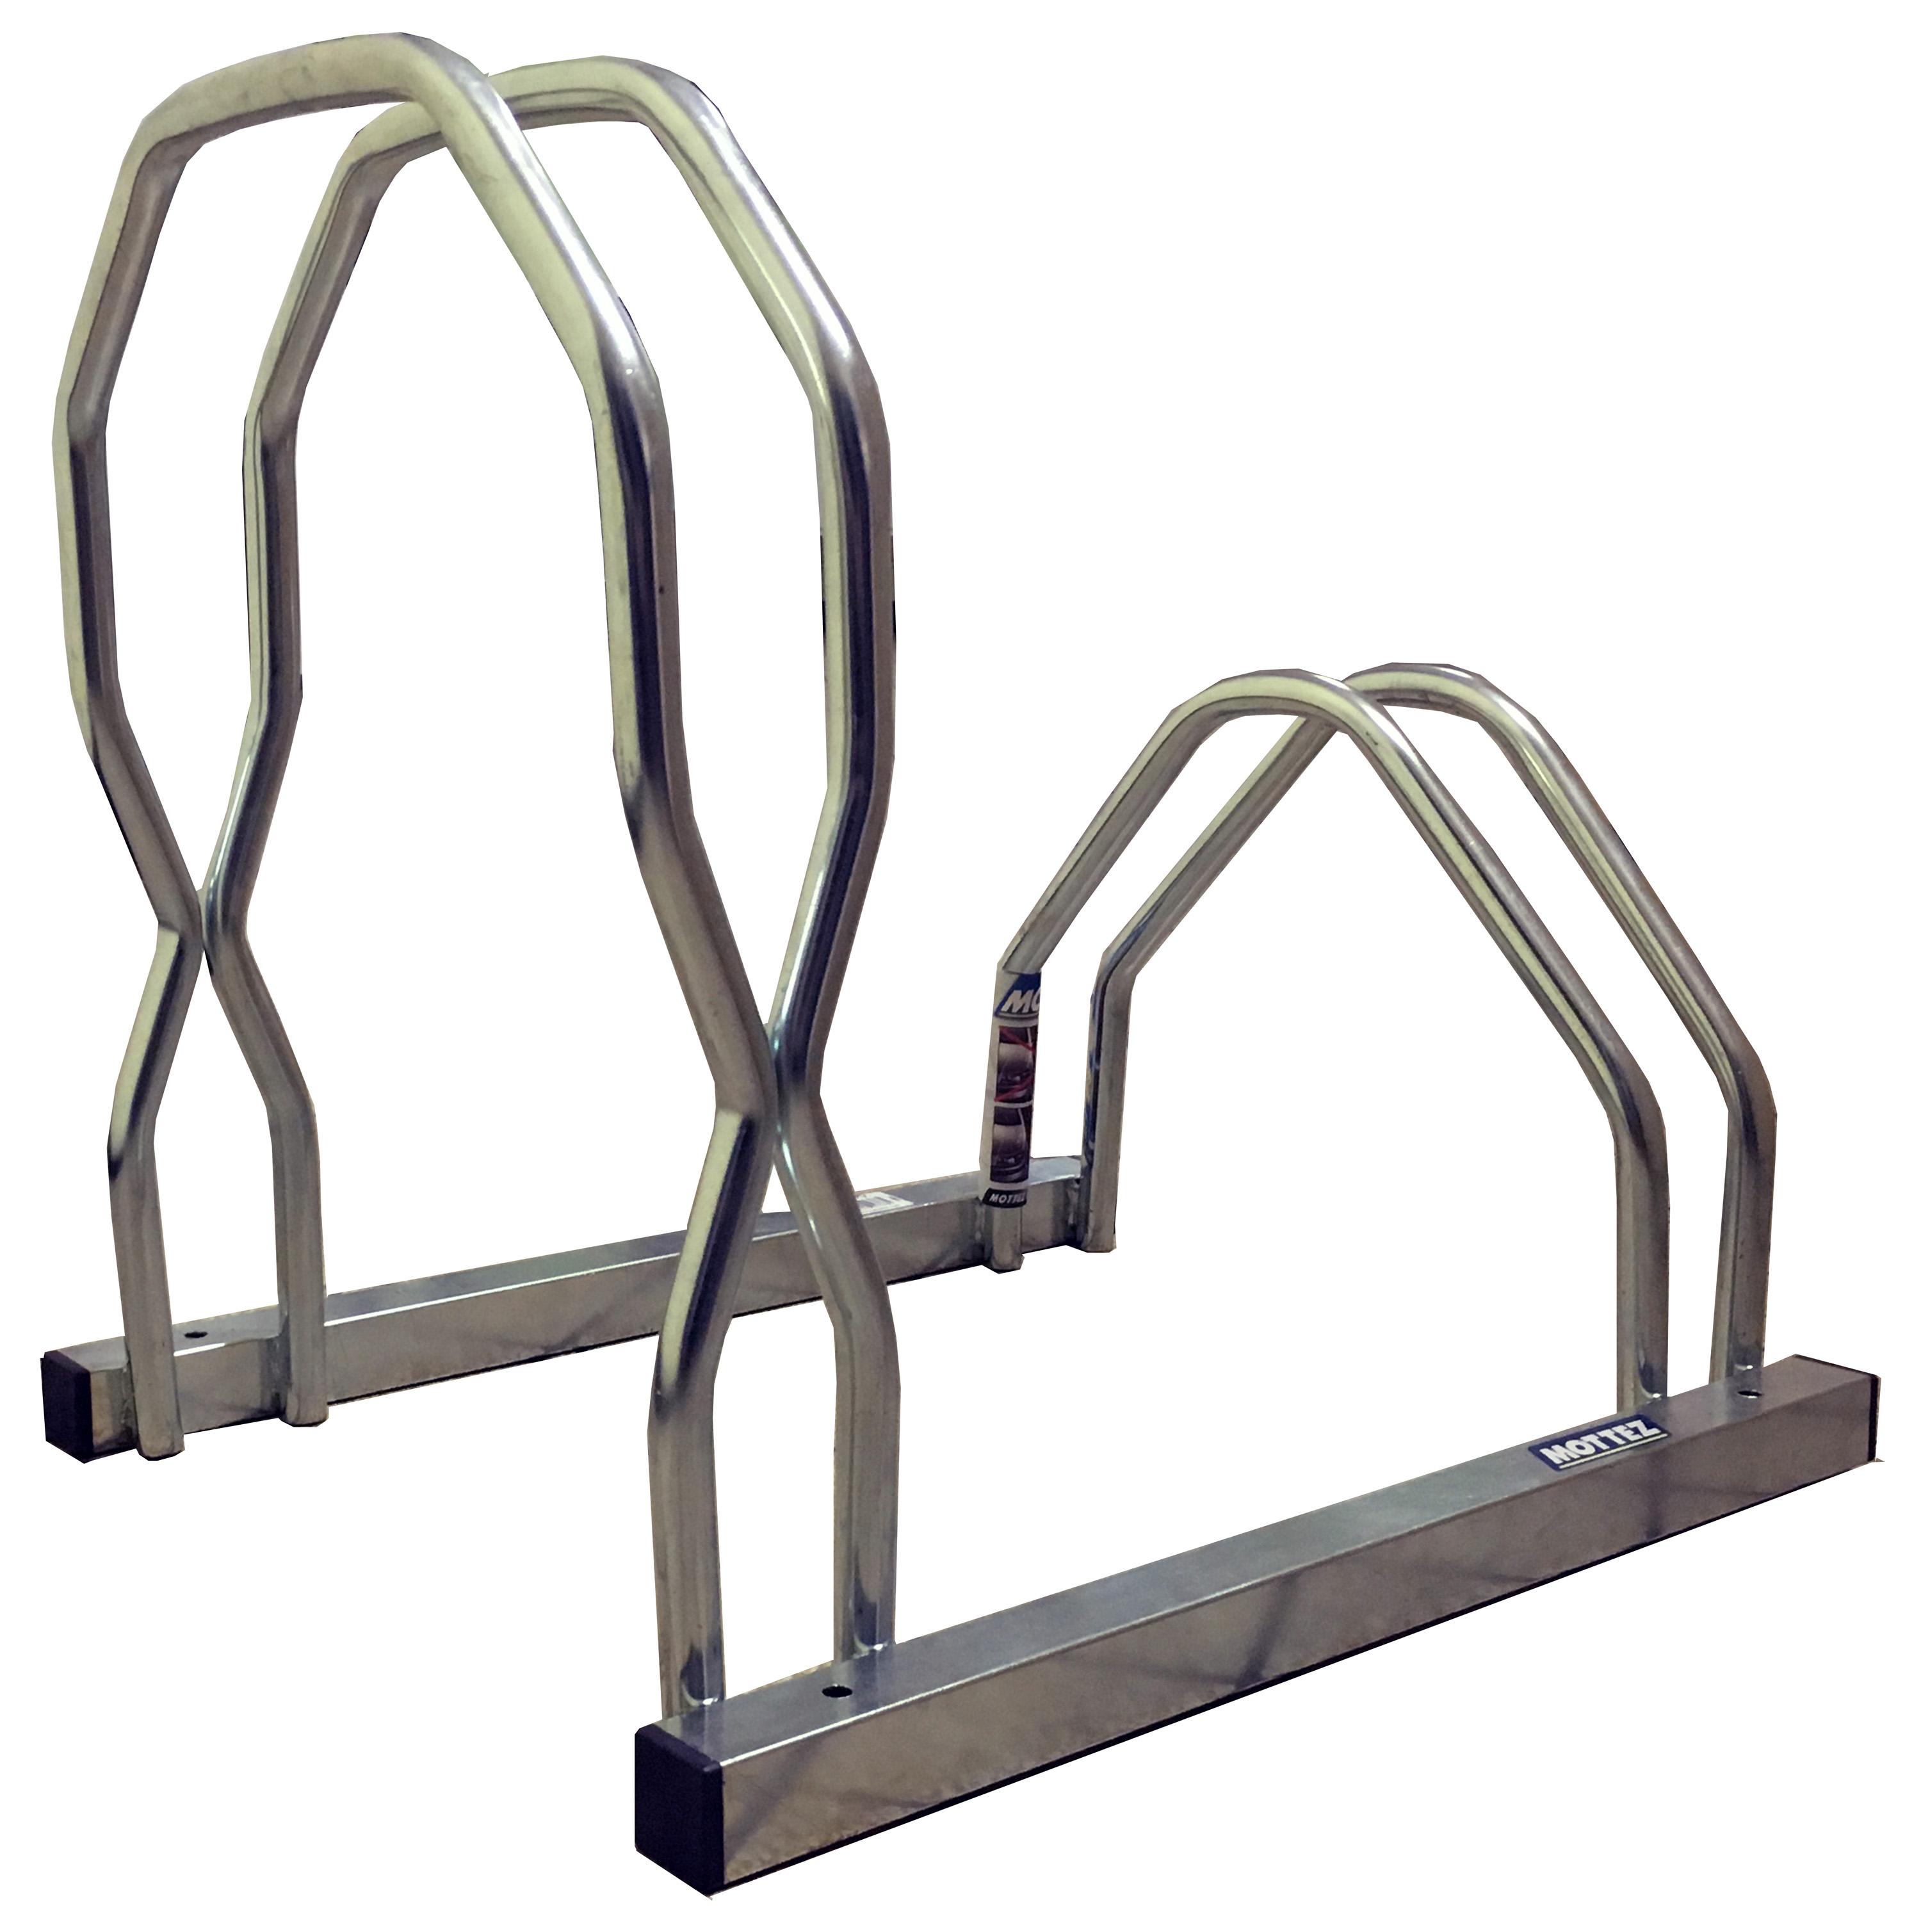 Cycle Stand Rack - Staggered Heights